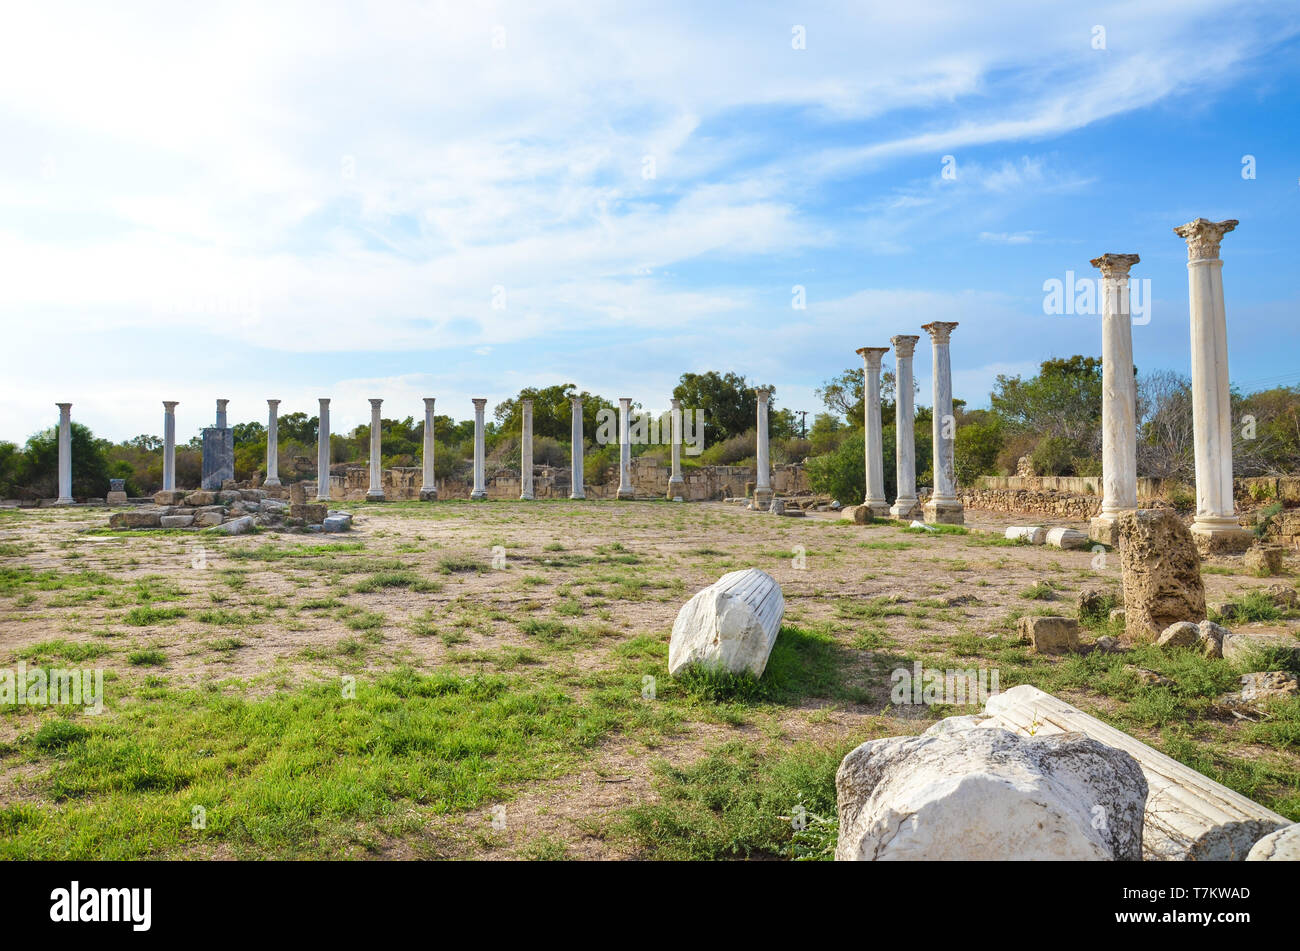 Well preserved ruins of ancient city Salamis in Northern Cyprus taken on a beautiful sunny day. The amazing Corinthian columns were part of gymnasium. Stock Photo